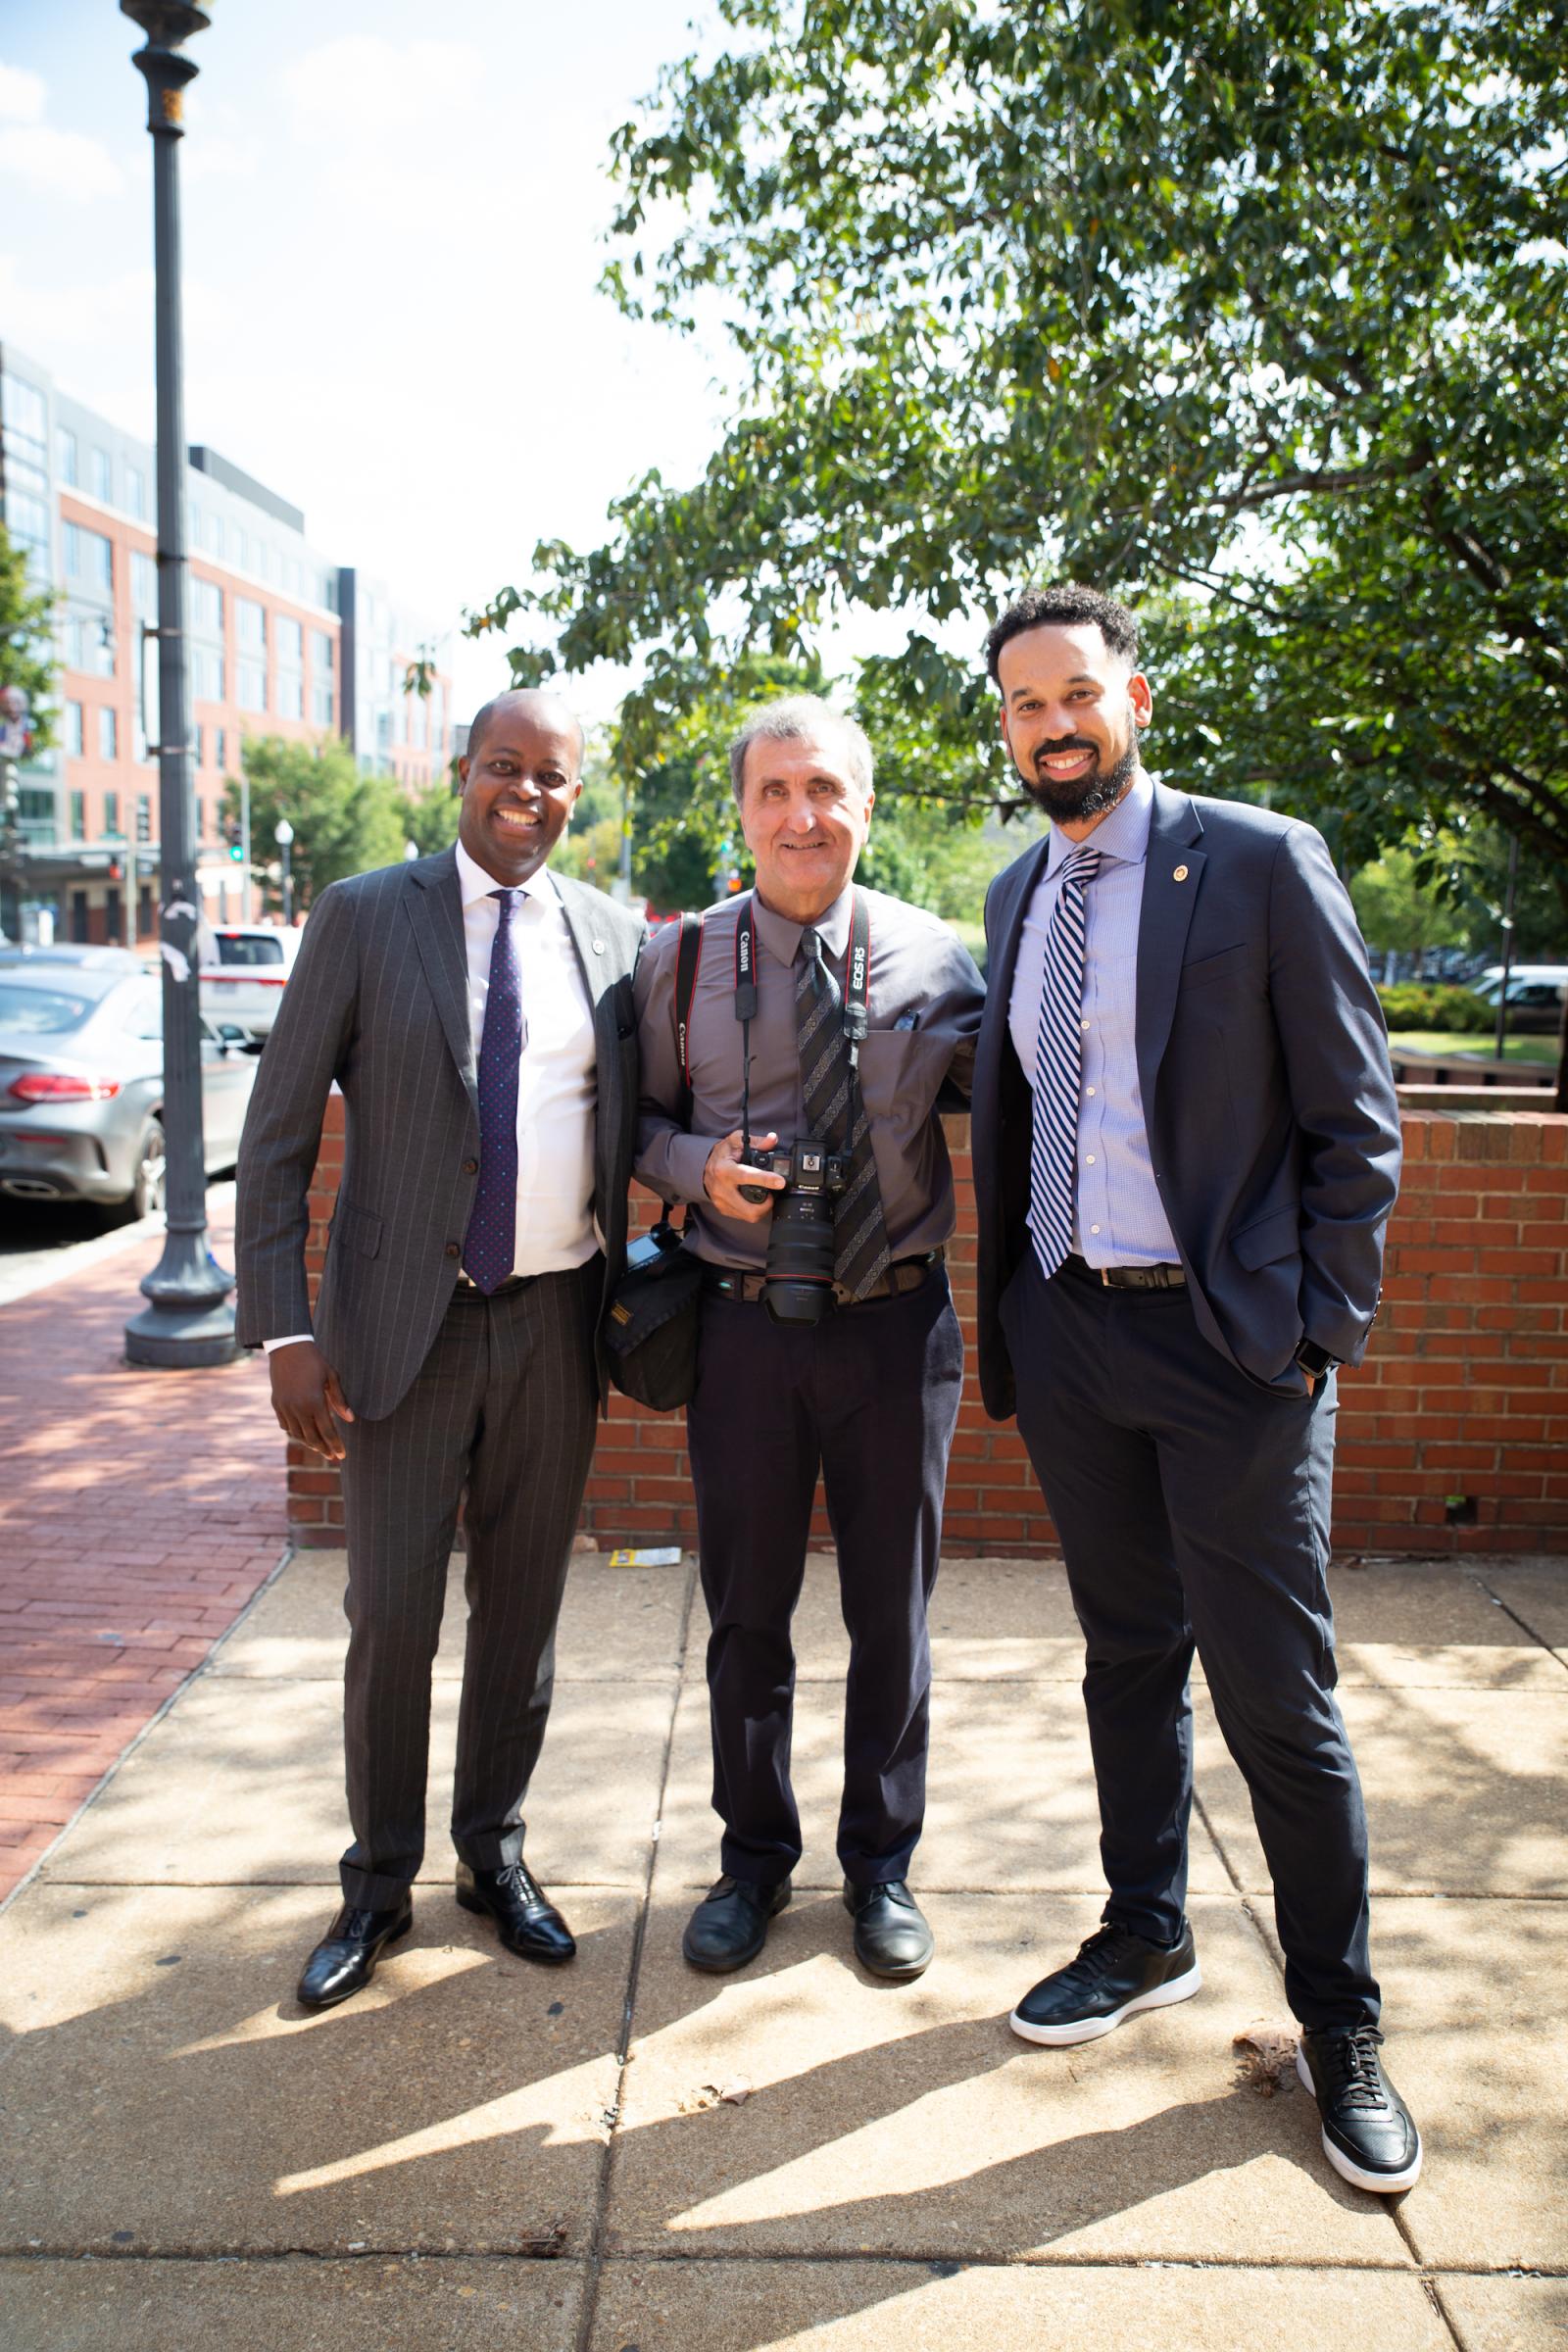 Dr. Frederick with Pete Souza and Frank Tramble